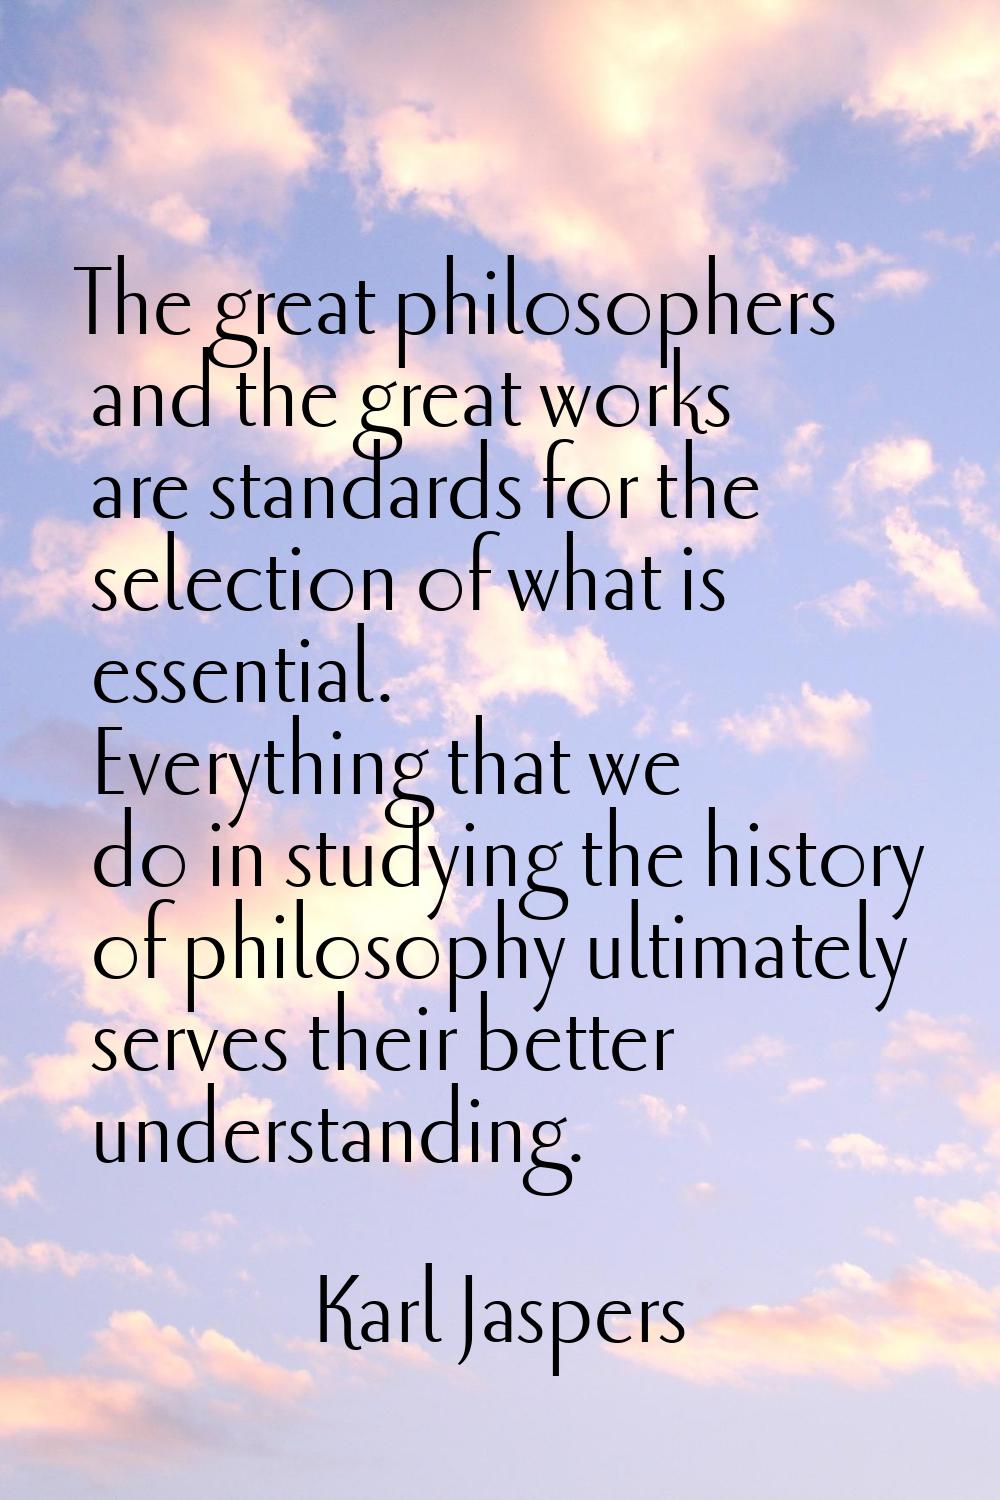 The great philosophers and the great works are standards for the selection of what is essential. Ev